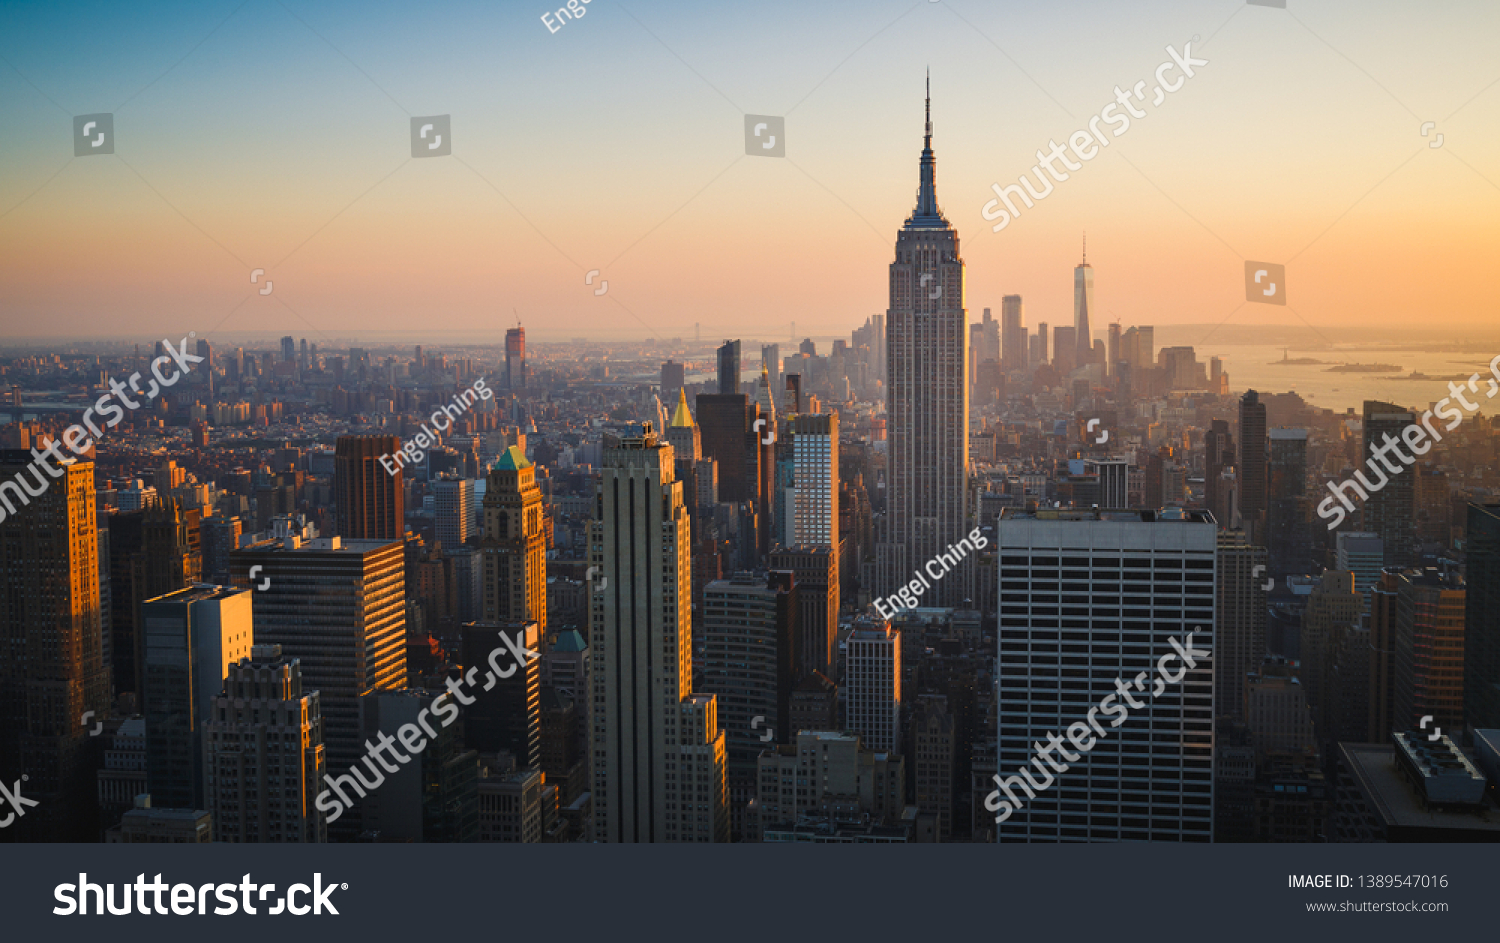 New York City Skyline with Urban Skyscrapers at Sunset, USA #1389547016